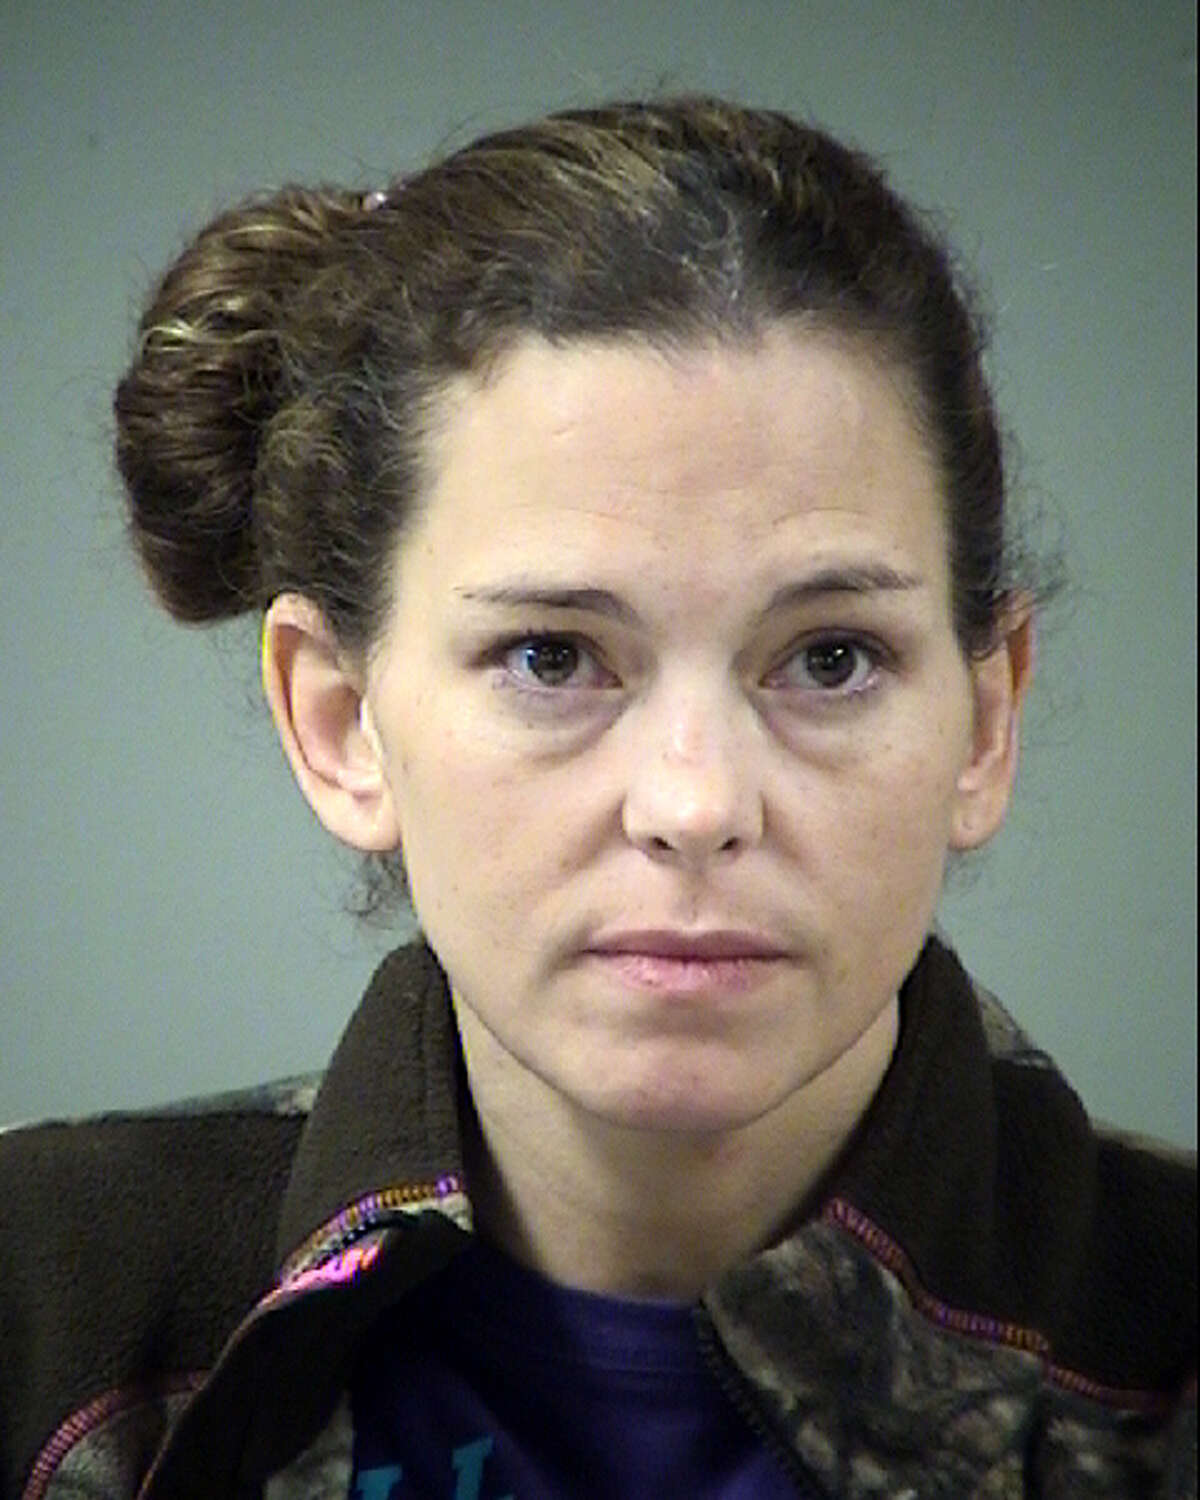 Melissa Feist-McCuistion, 39, now faces a charge of public lewdness. She was booked into the Bexar County Jail on a $1,600 bond.